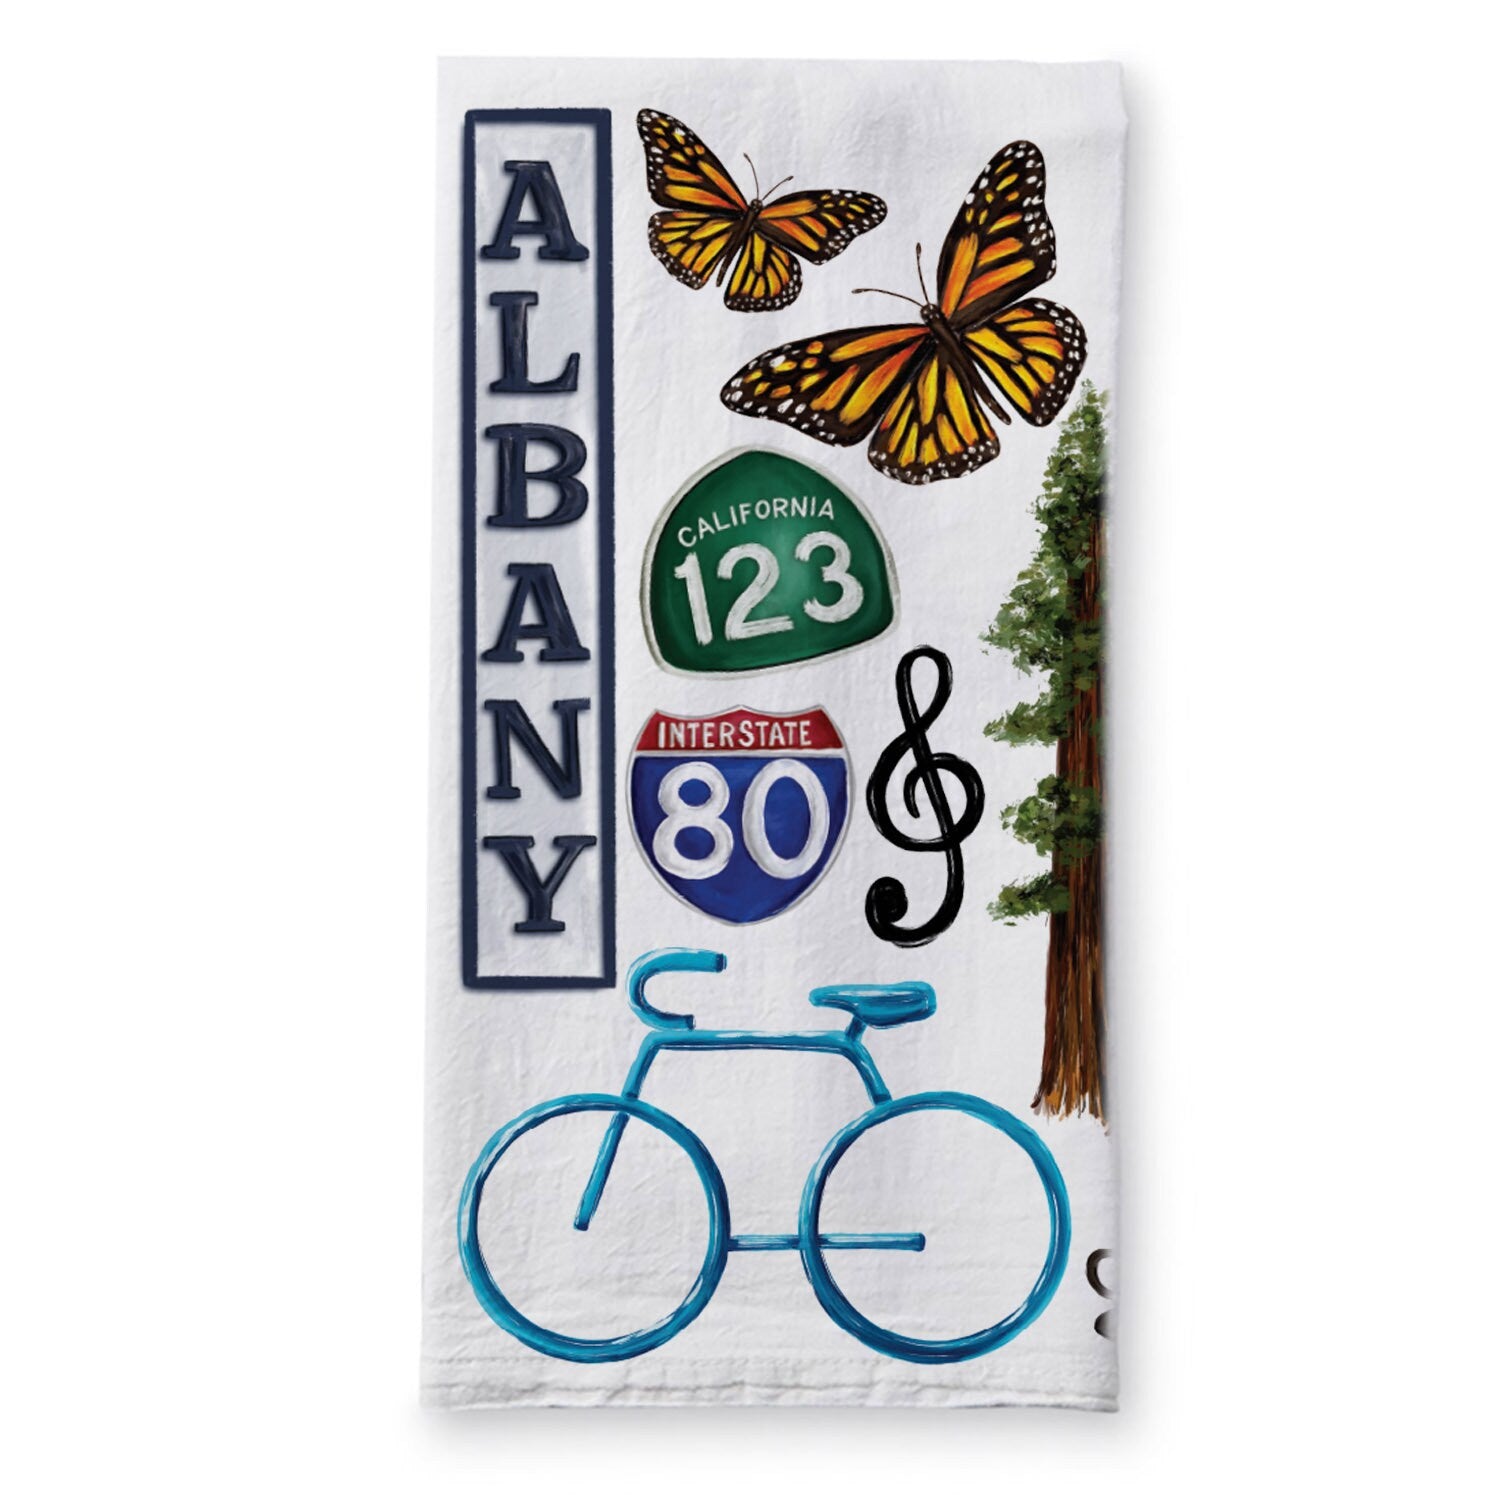 Albany and Berkeley Collage Tea Towel